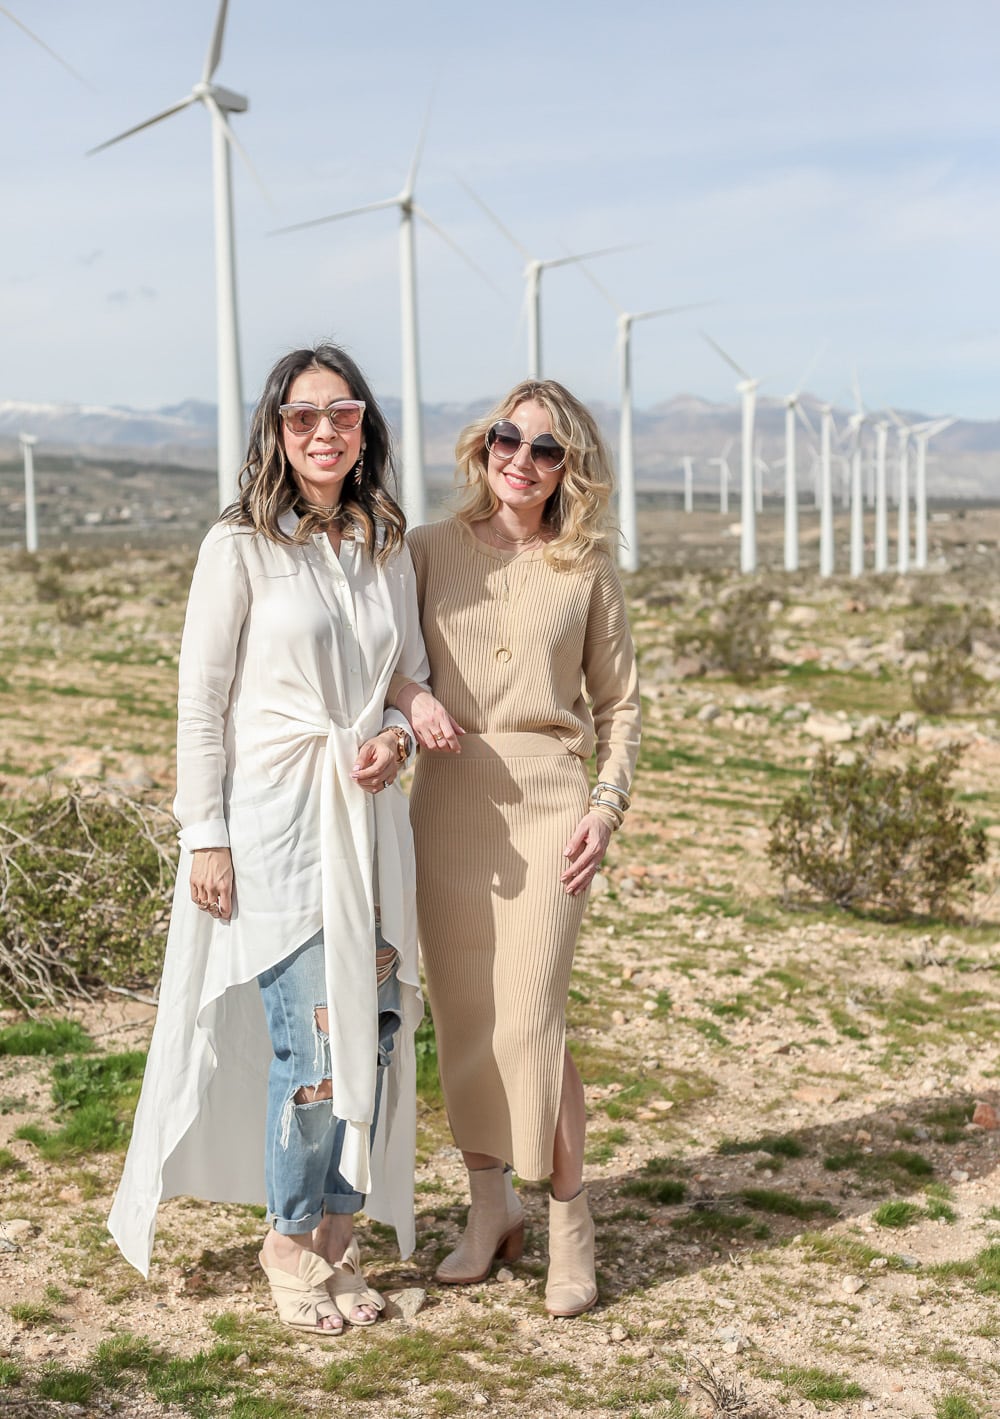 palmer harding waterfall shirt with ripped boyfriend jeans and charlotte olympia ilona bow mules at palms springs wind farm and blogger friend erin of busbee style